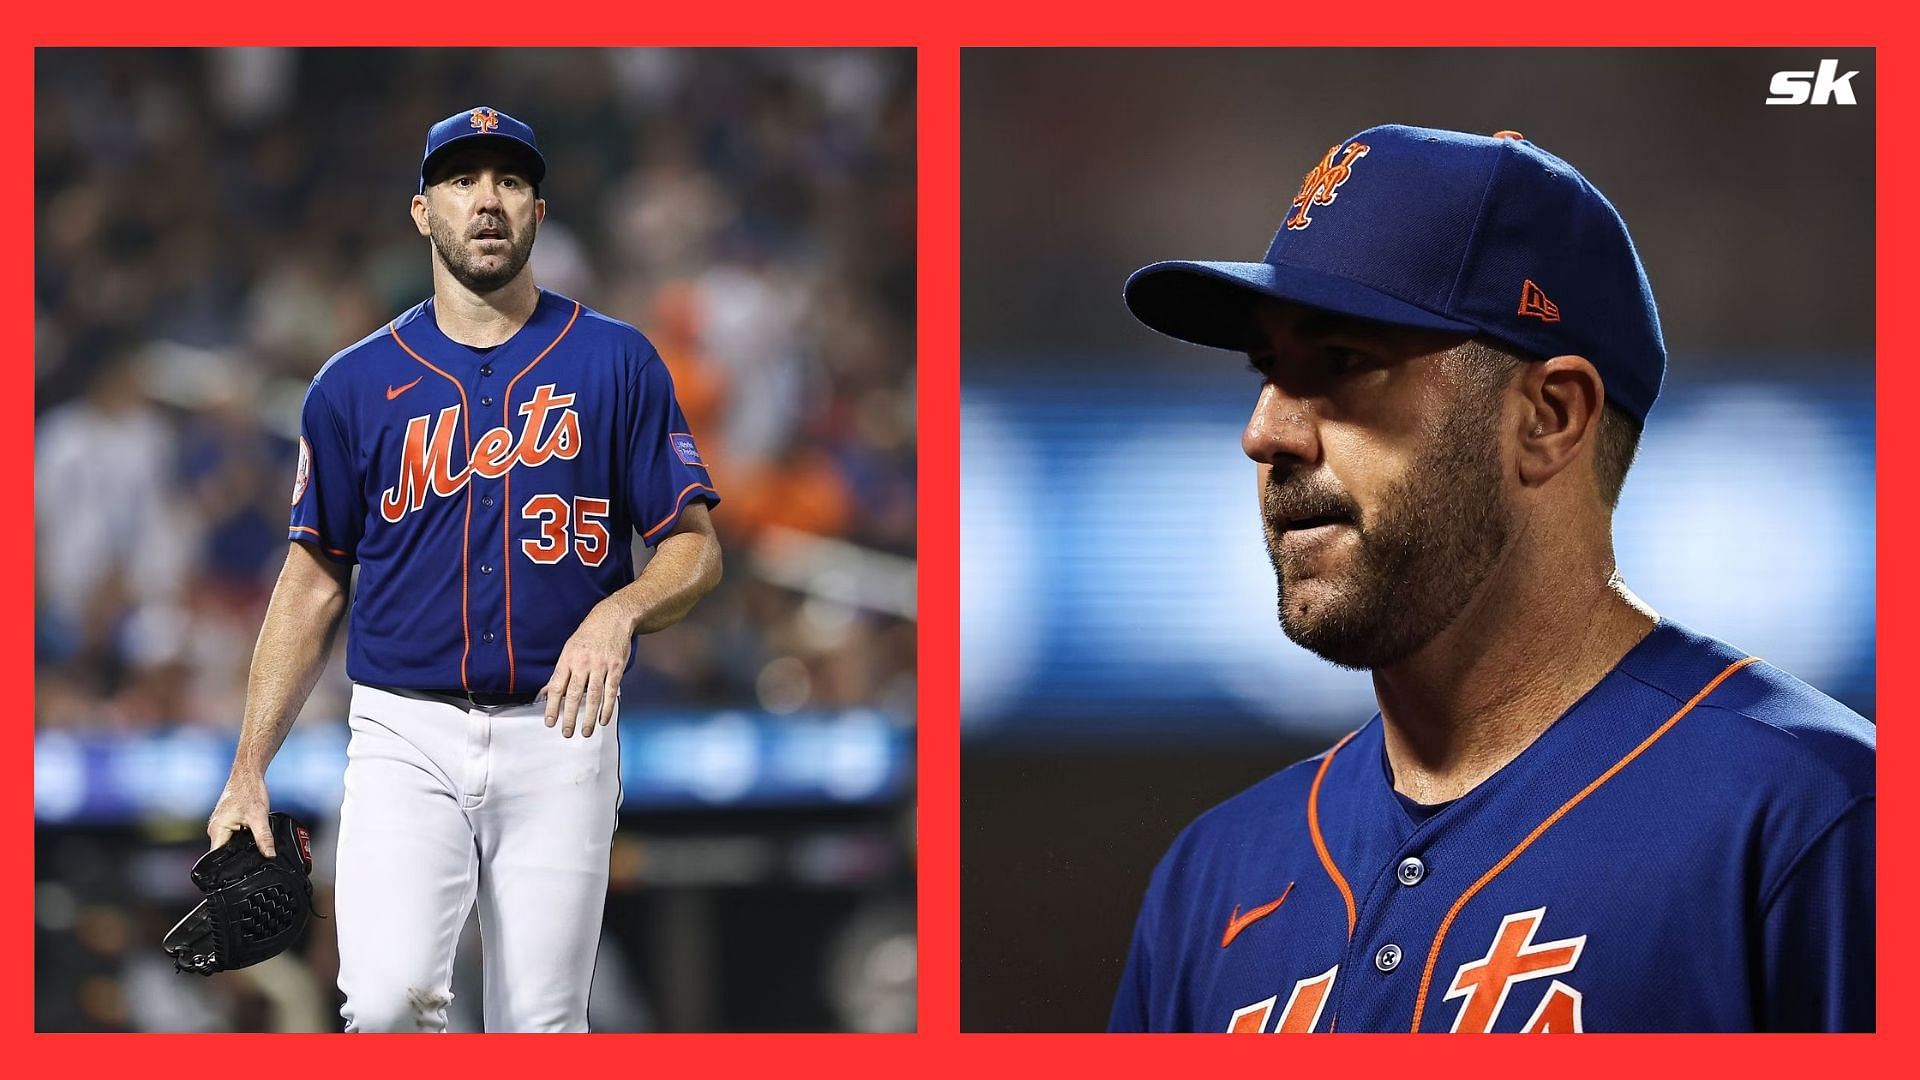 Mets ace Justin Verlander persistent to stay in New York amid trade rumors: &quot;I want to win here&quot;